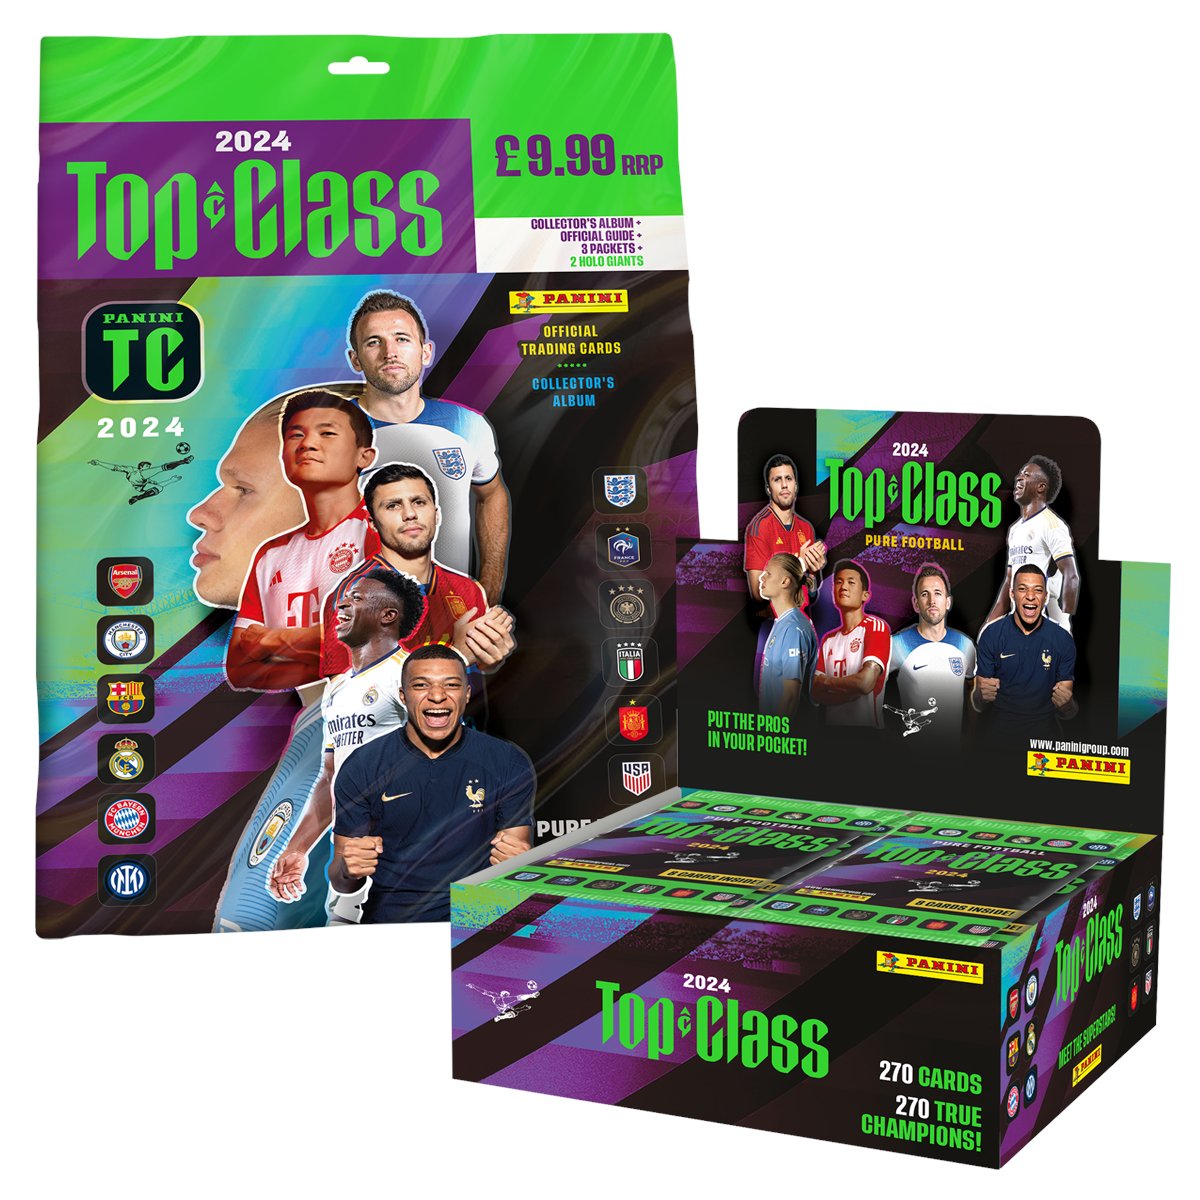 Panini FIFA Top Class 2024 Trading Cards collection starter packs are now available to pre-order! bit.ly/3T0I8pl #gotgotneed #football #collectibles